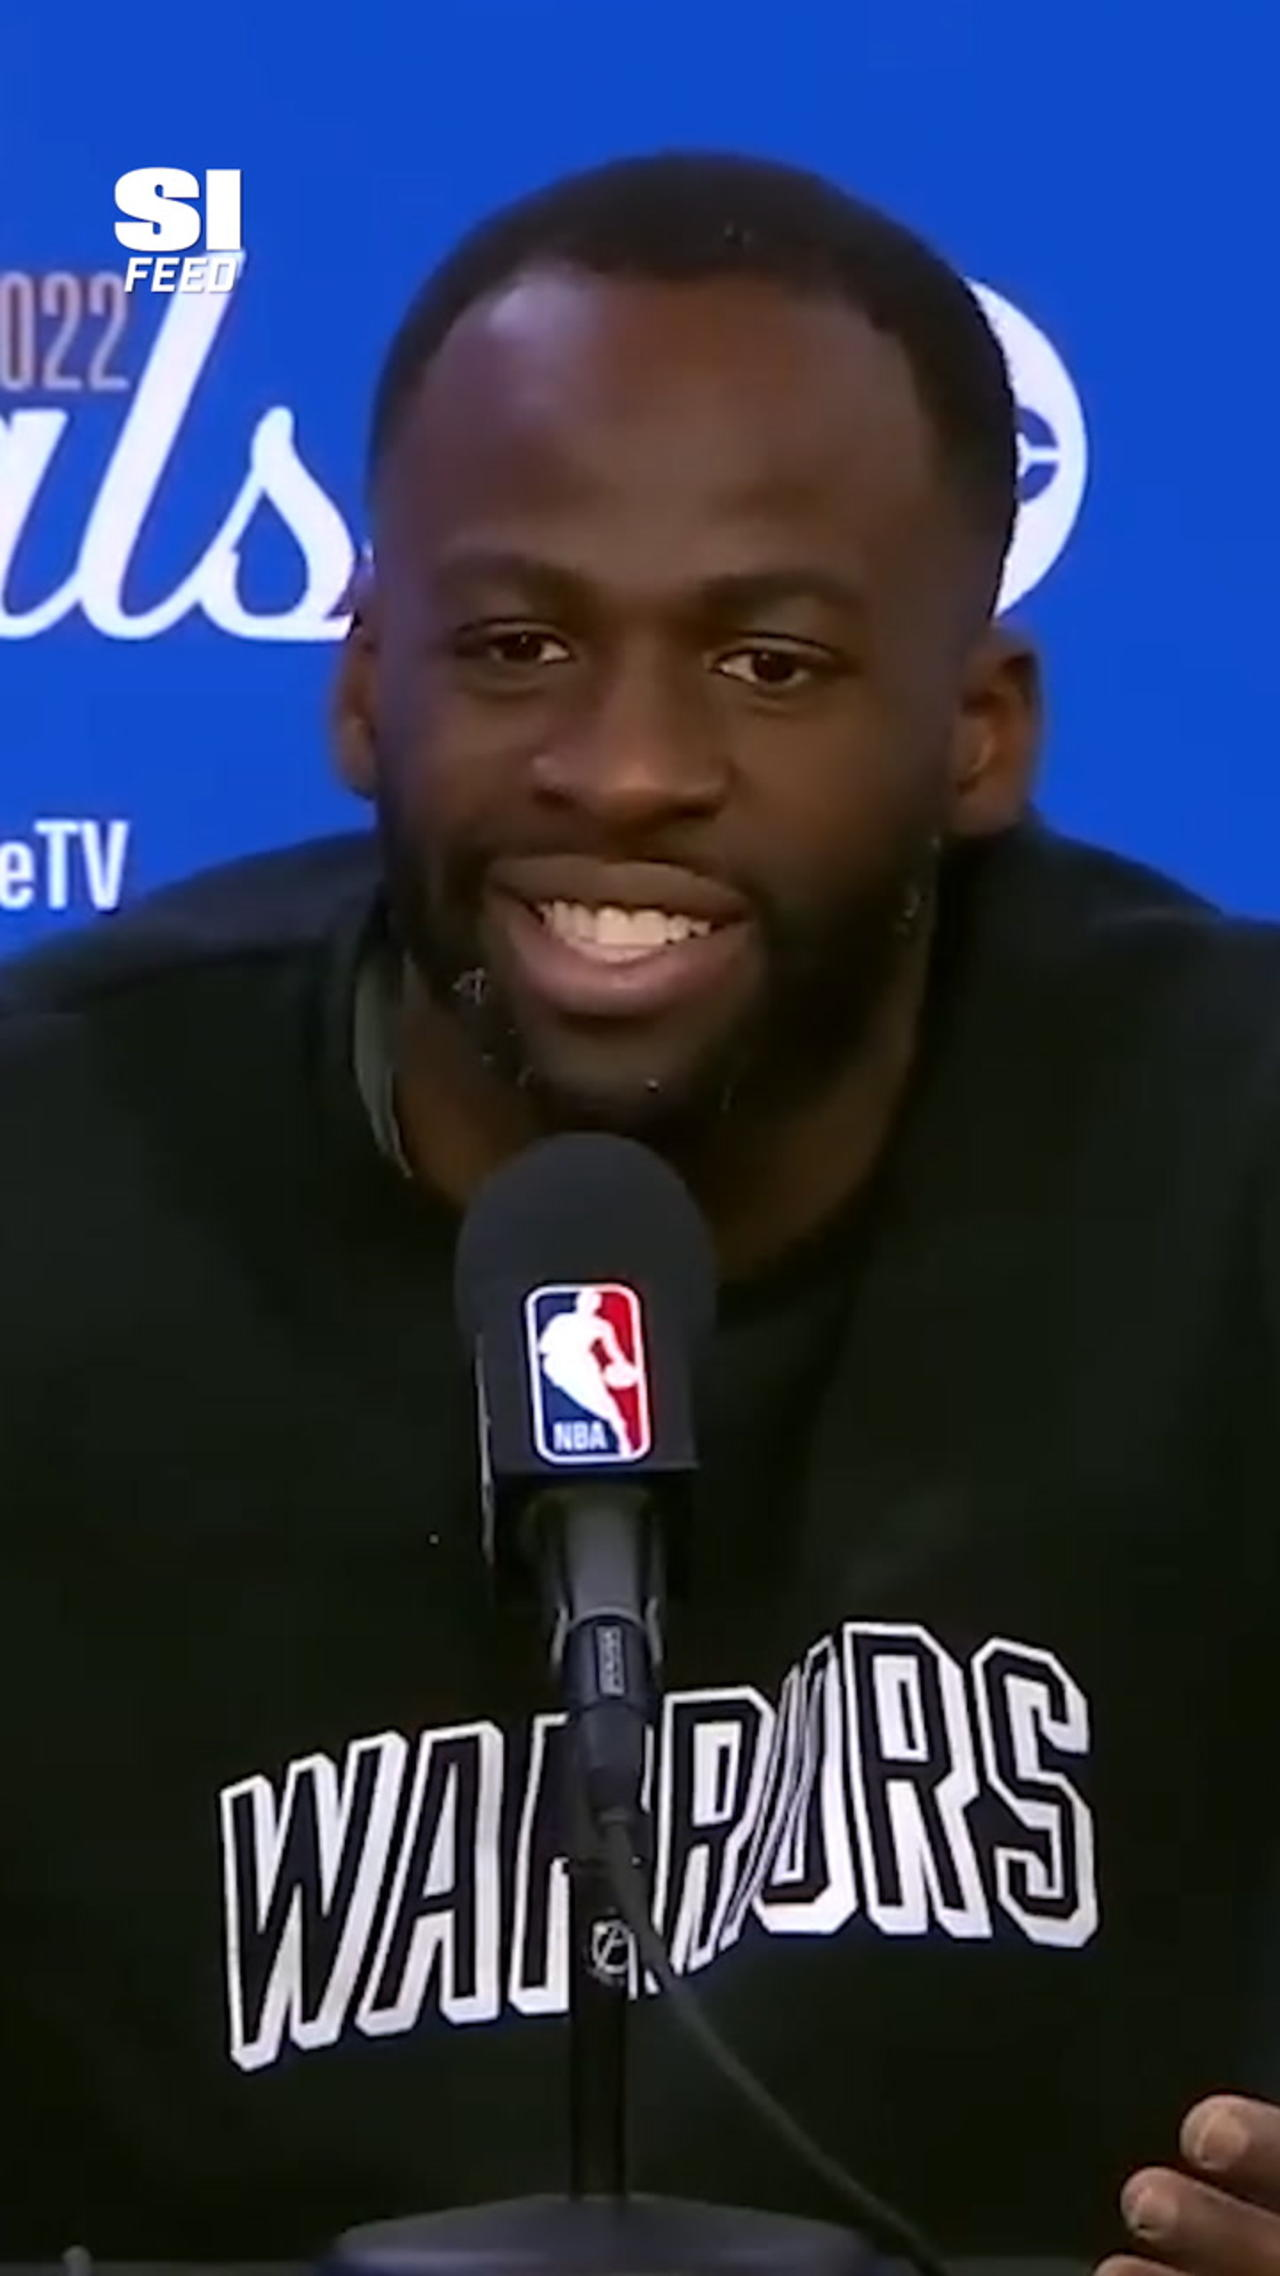 Draymond Green Addressed the Physicality of the NBA